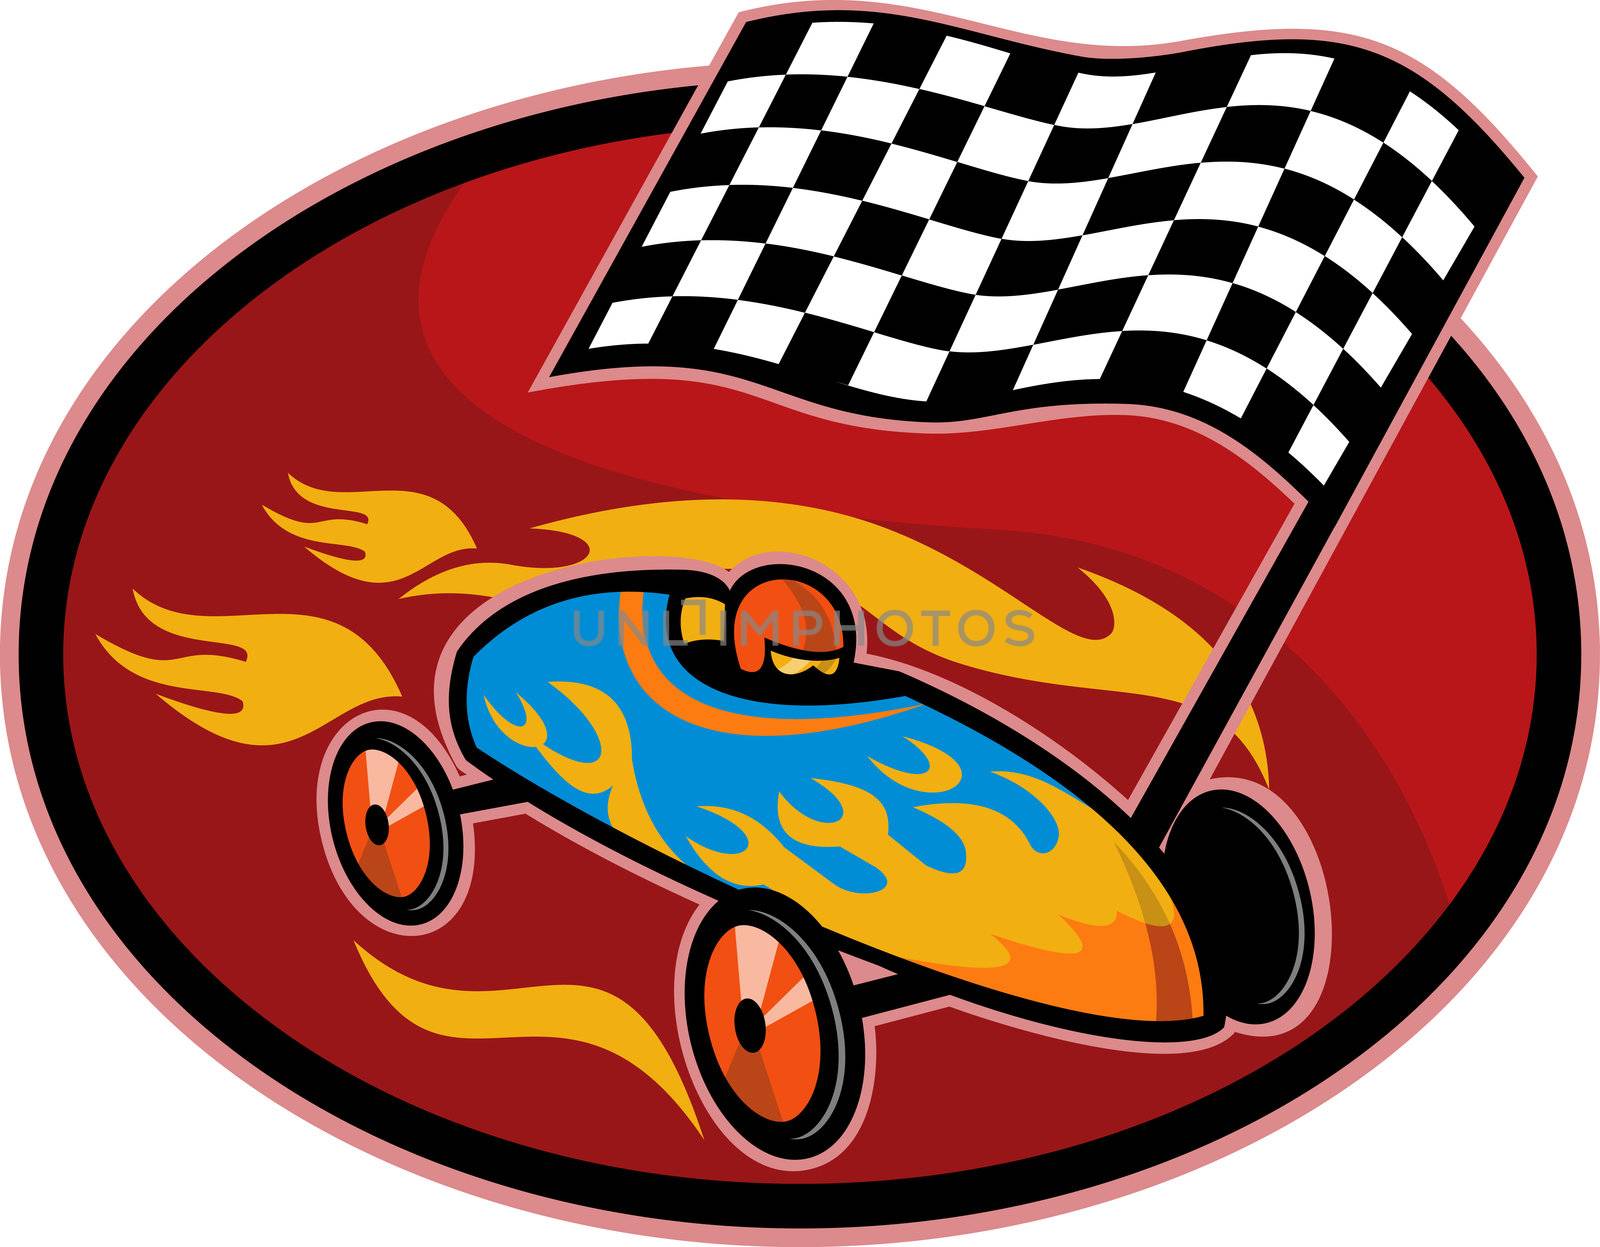 Soap box derby racing with race flag by patrimonio